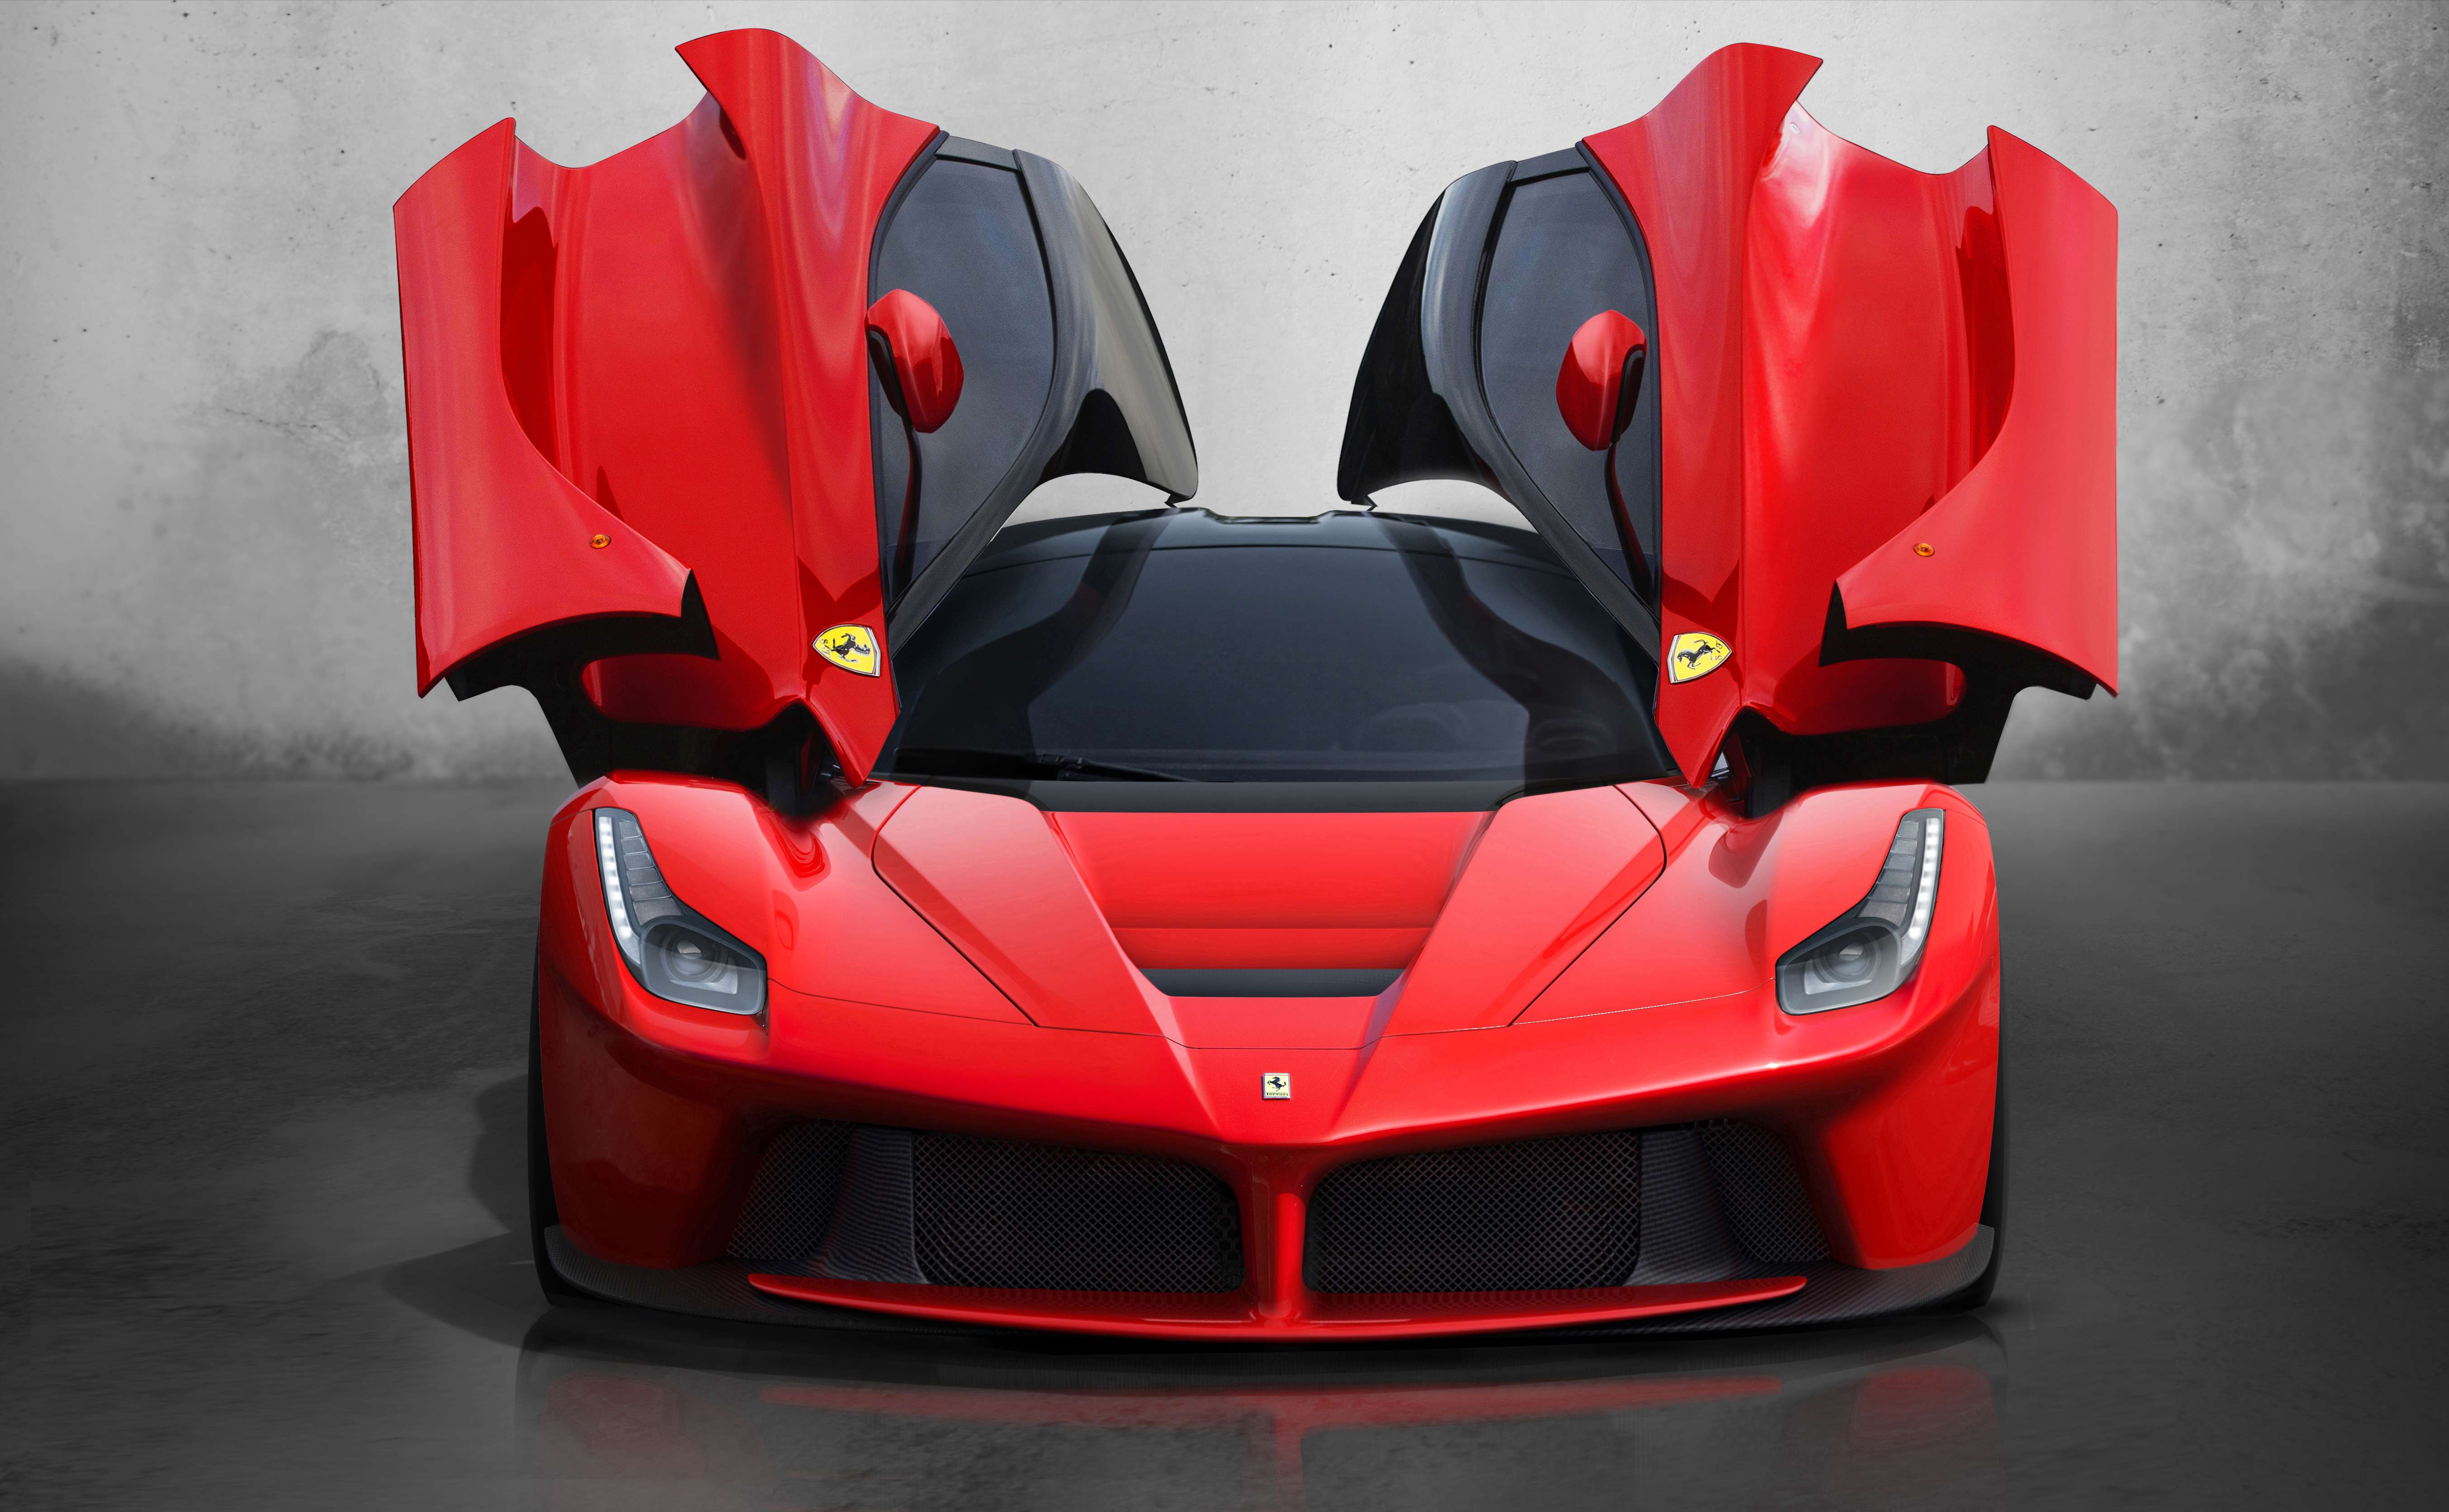 The LaFerrari unveiled in Geneva in 2013 is an example of Ferrari's attitude that each car sold is as technologically and aesthetically forward as possible